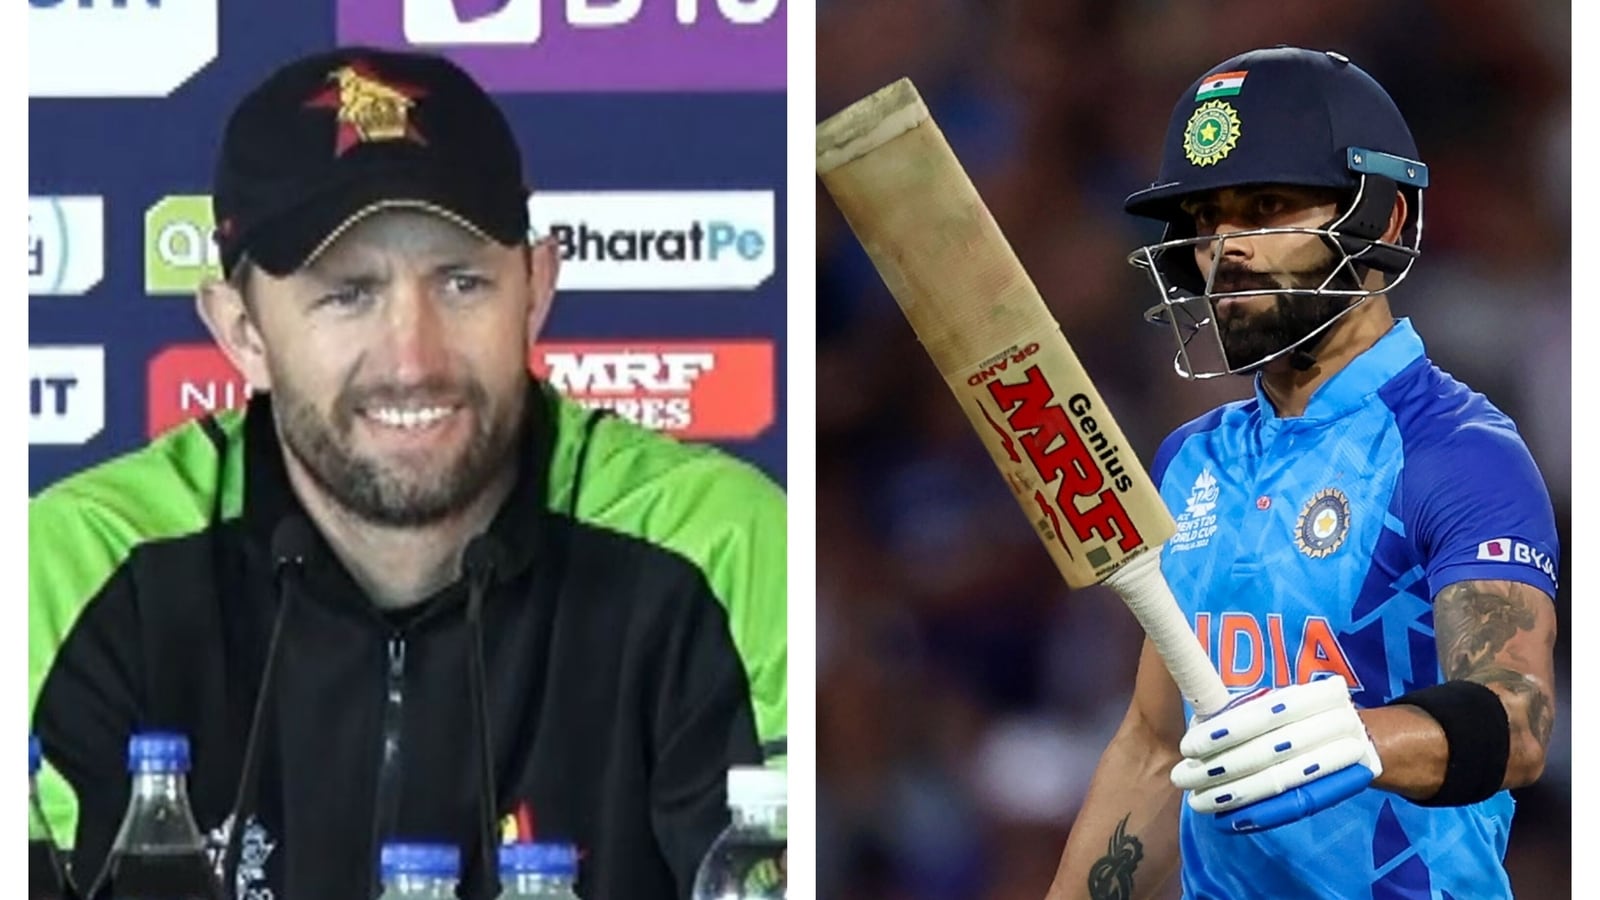 zimbabwe-captain-s-reply-to-question-on-virat-kohli-s-b-day-floors-everyone-ahead-of-t20-world-cup-match-vs-india